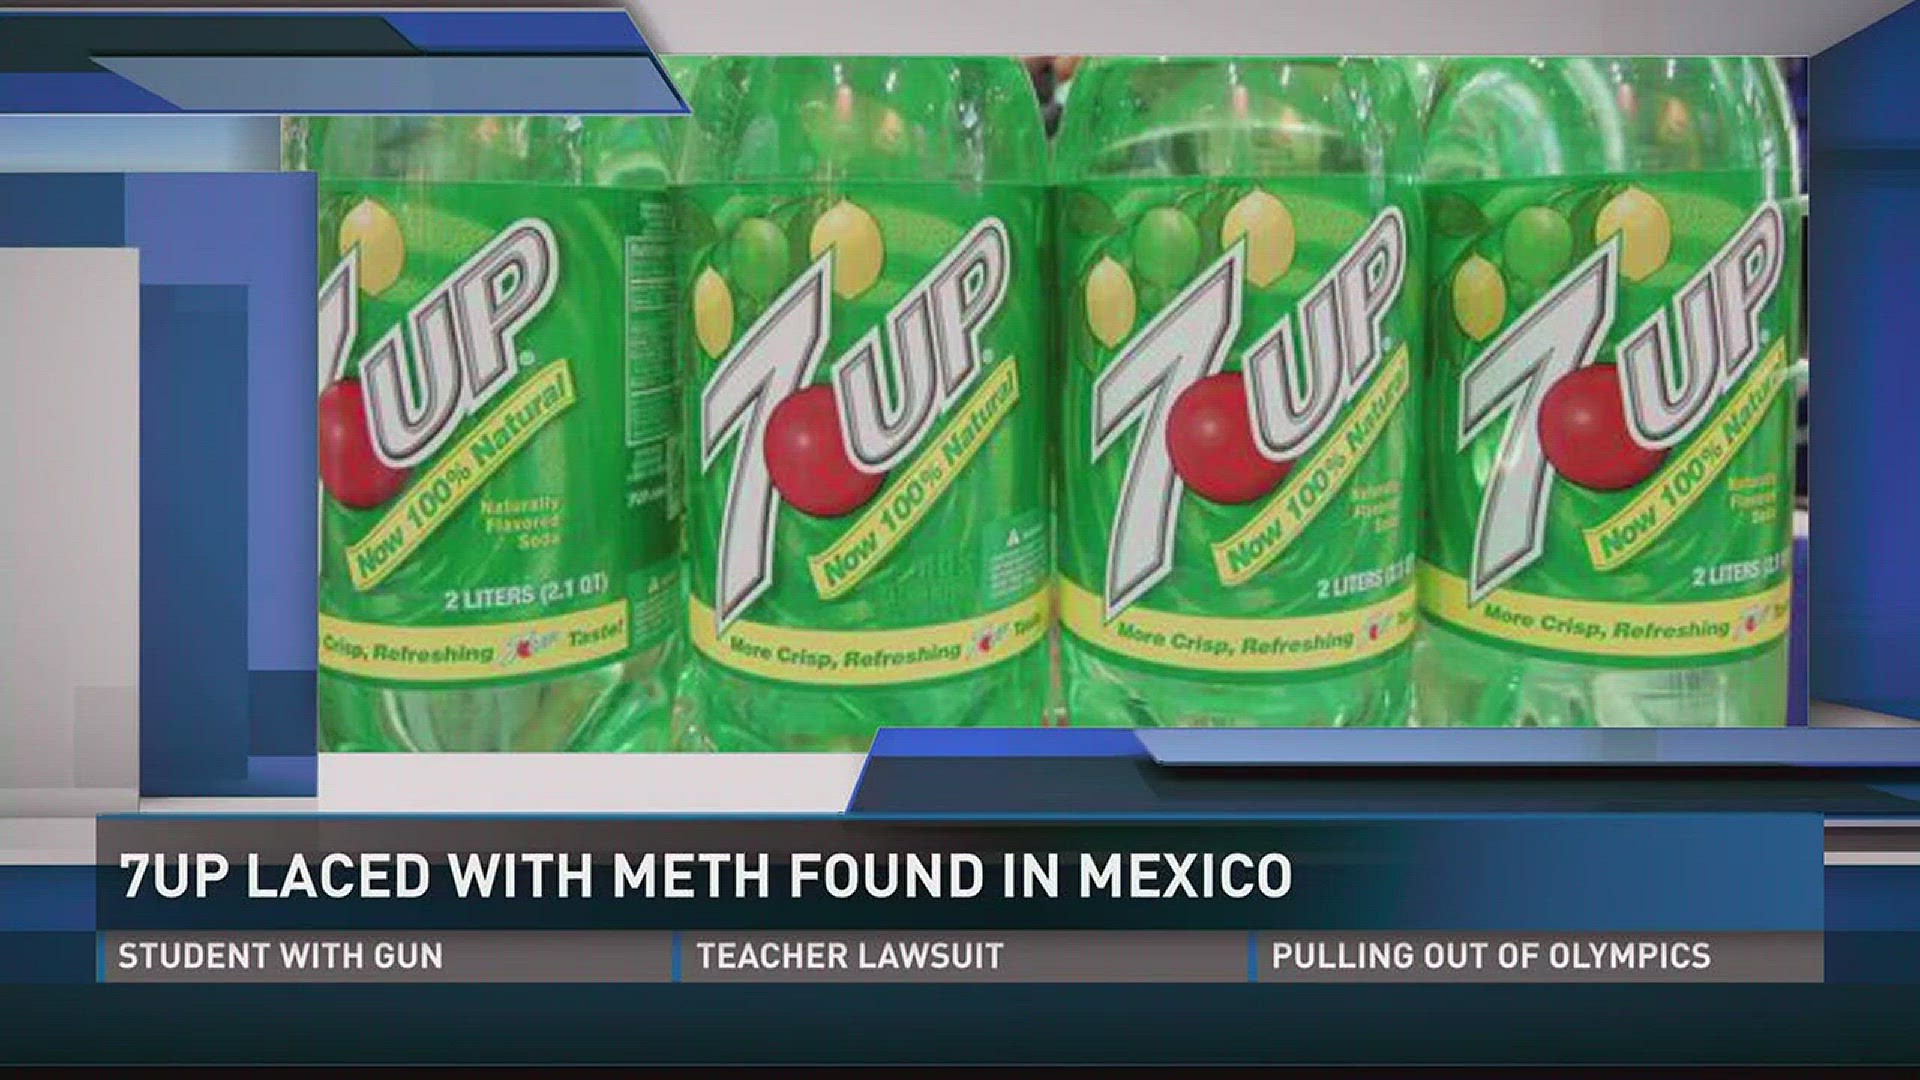 The contaminated soft drinks caused seven people to become ill and has killed one person, according to the Attorney General of Justice of the State of Baja California.